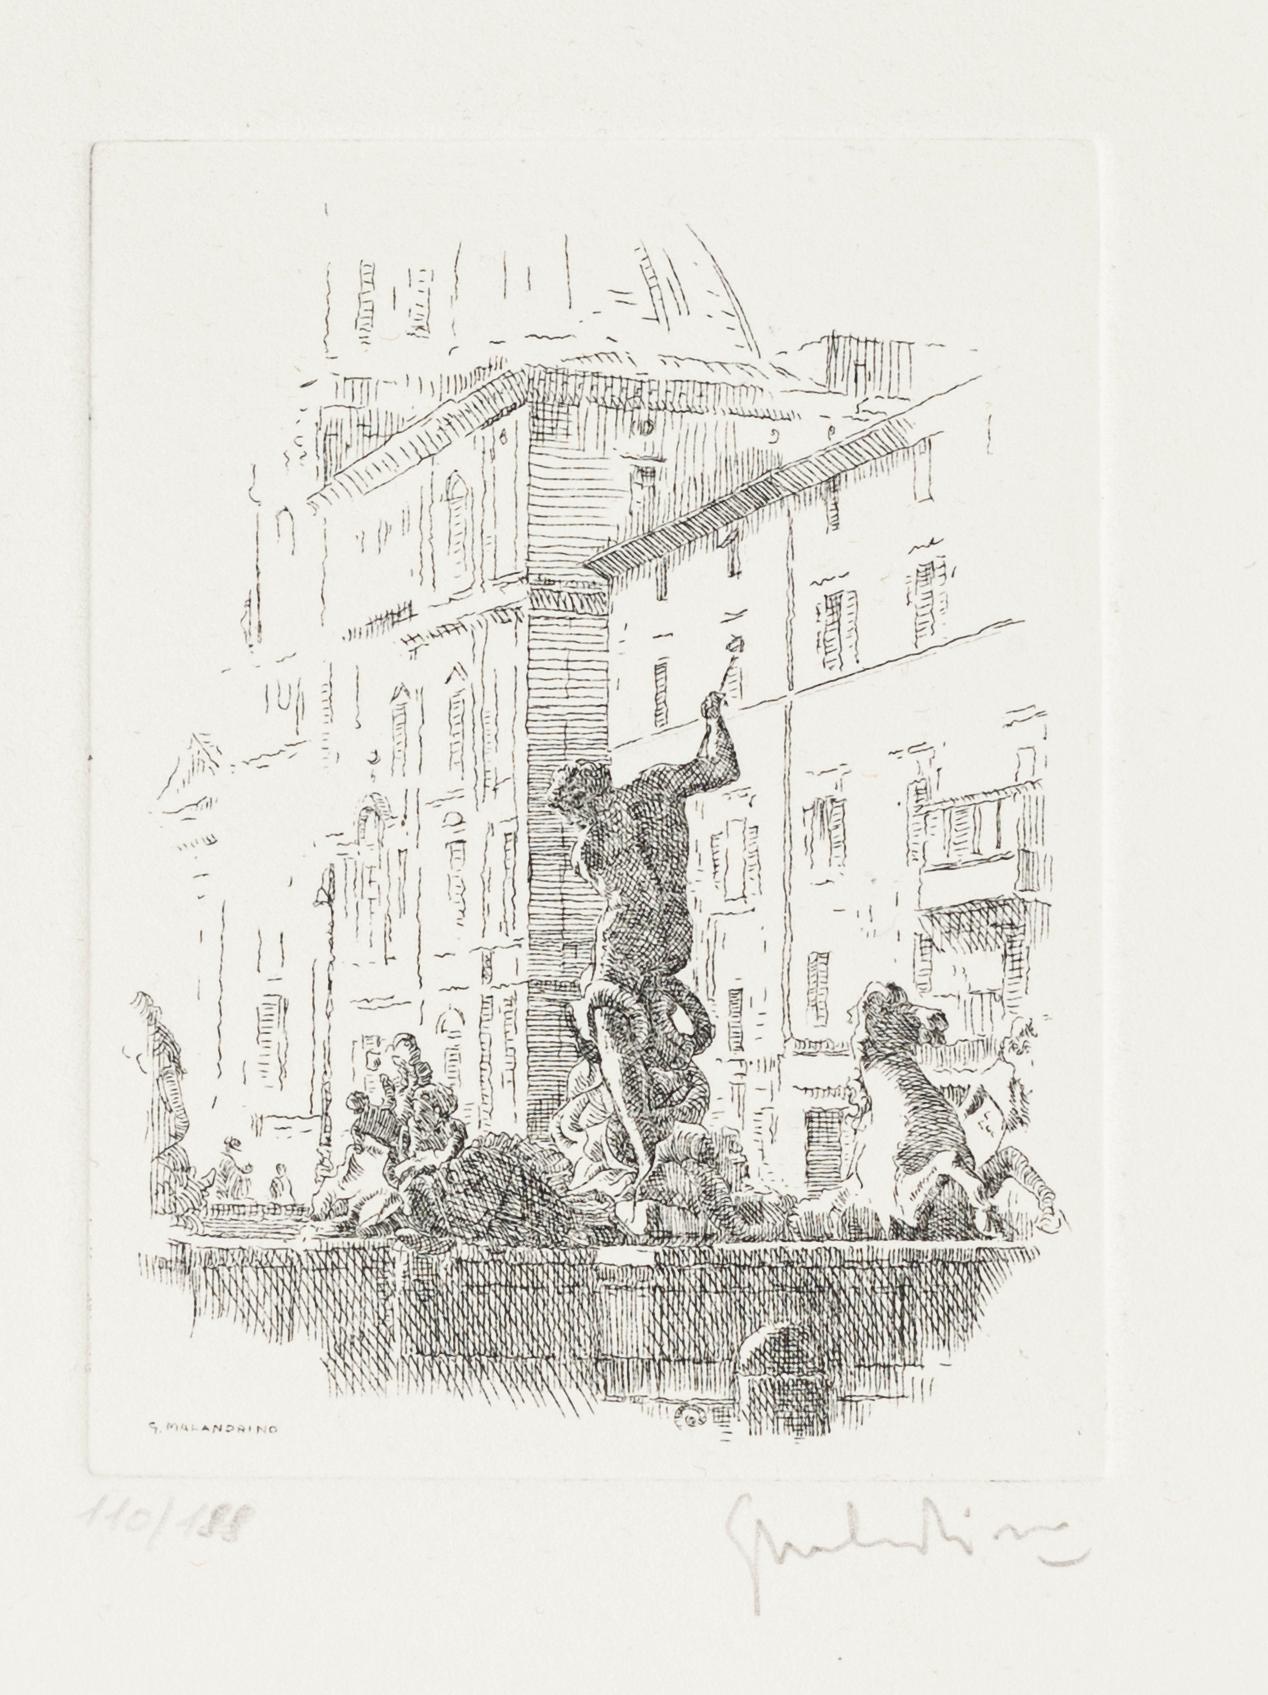 Navona Square - Fountain of the Triton is an original artwork realized in the 1960s by Giuseppe Malandrino.

Original hand-colored print.

Hand-signed by the artist in pencil on the lower right corner.

Good conditions.

This artwork shows a glimpse